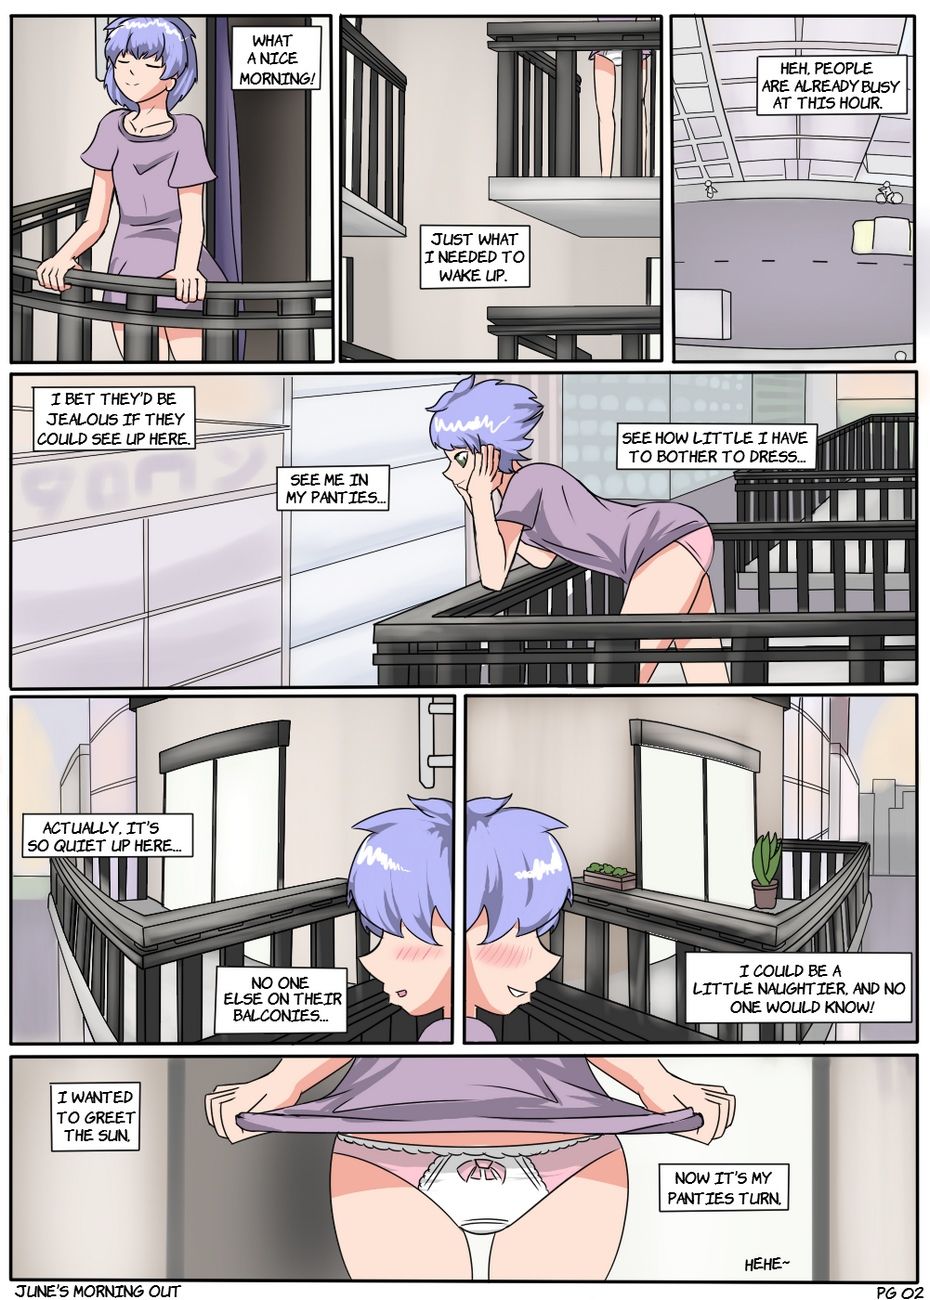 June's Morning Out page 2